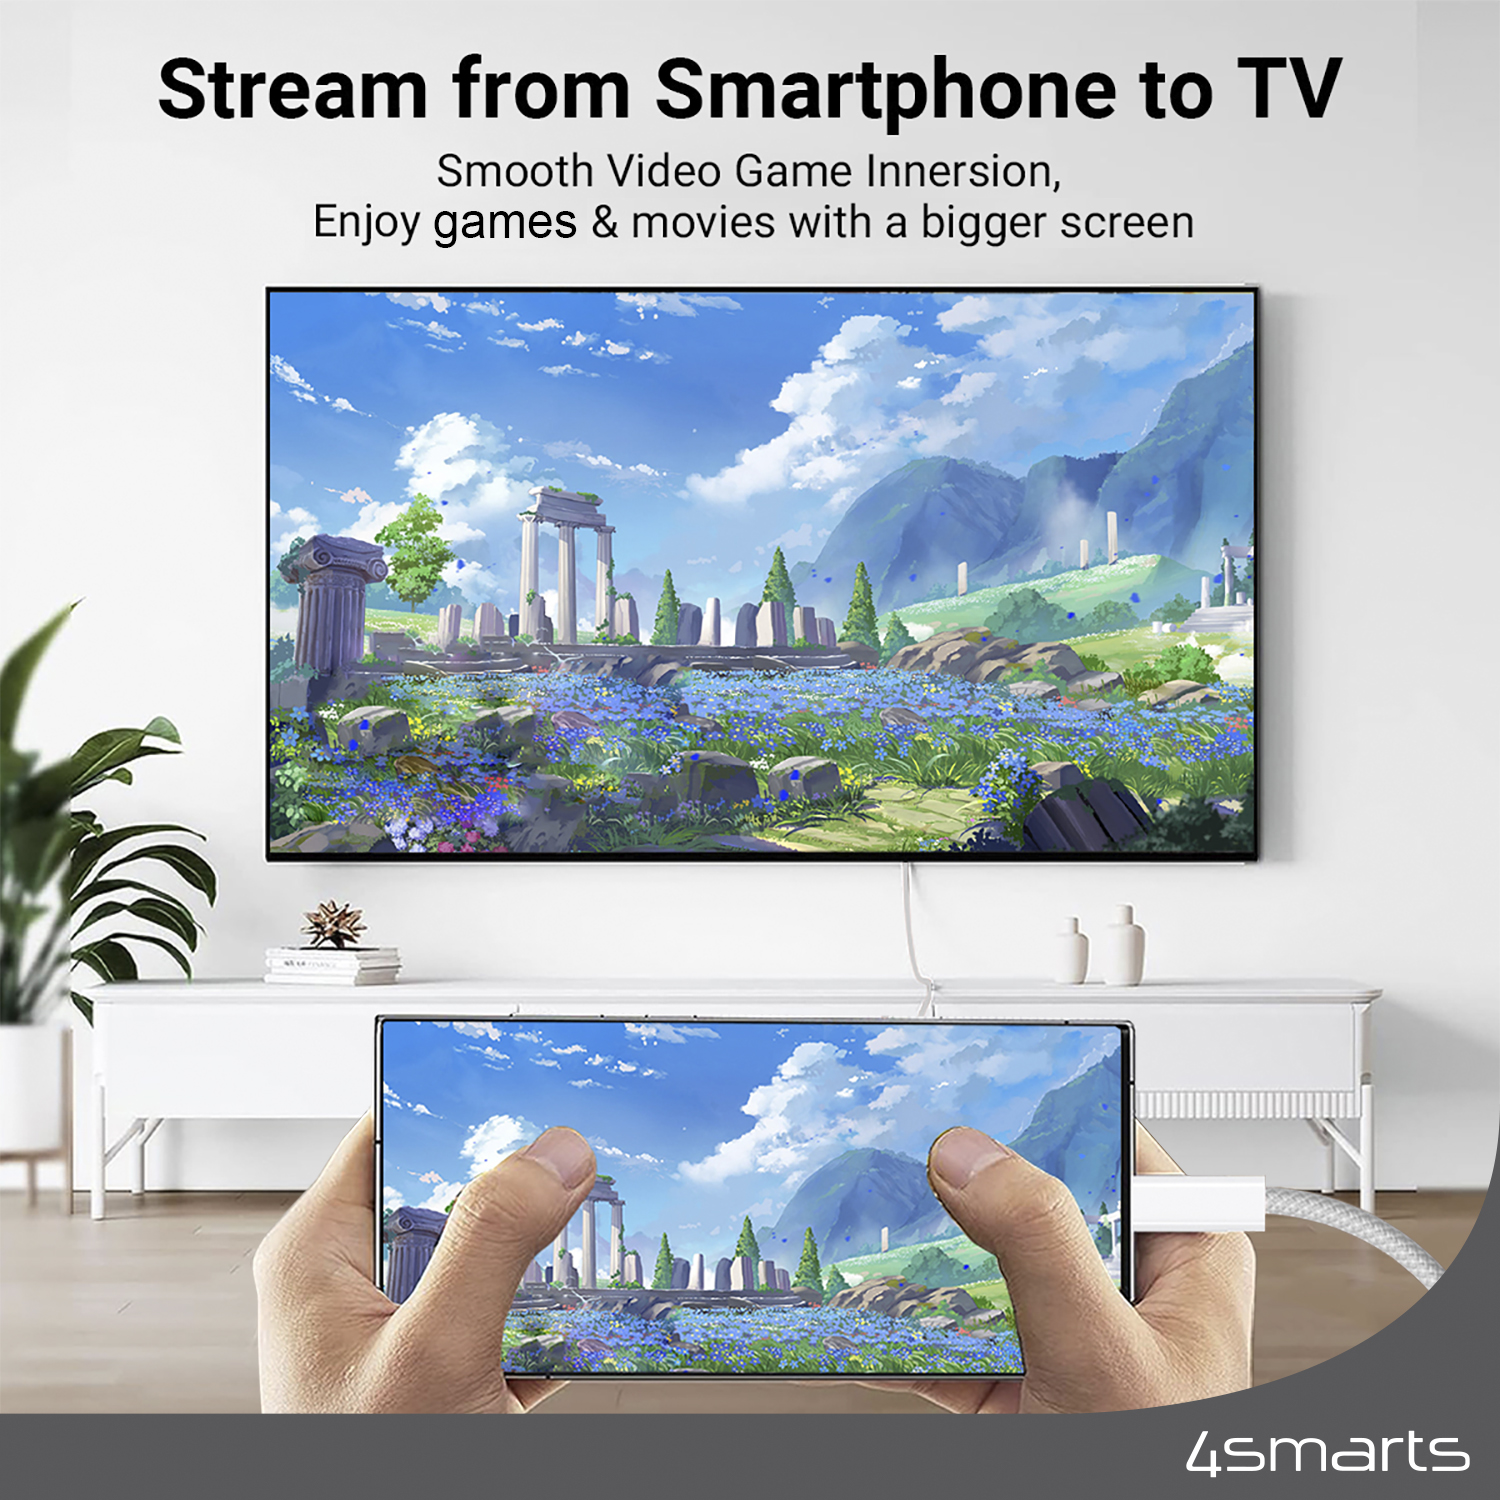 With the 4smarts USB-C to HDMI cable, you can easily stream from your smartphone to your TV.